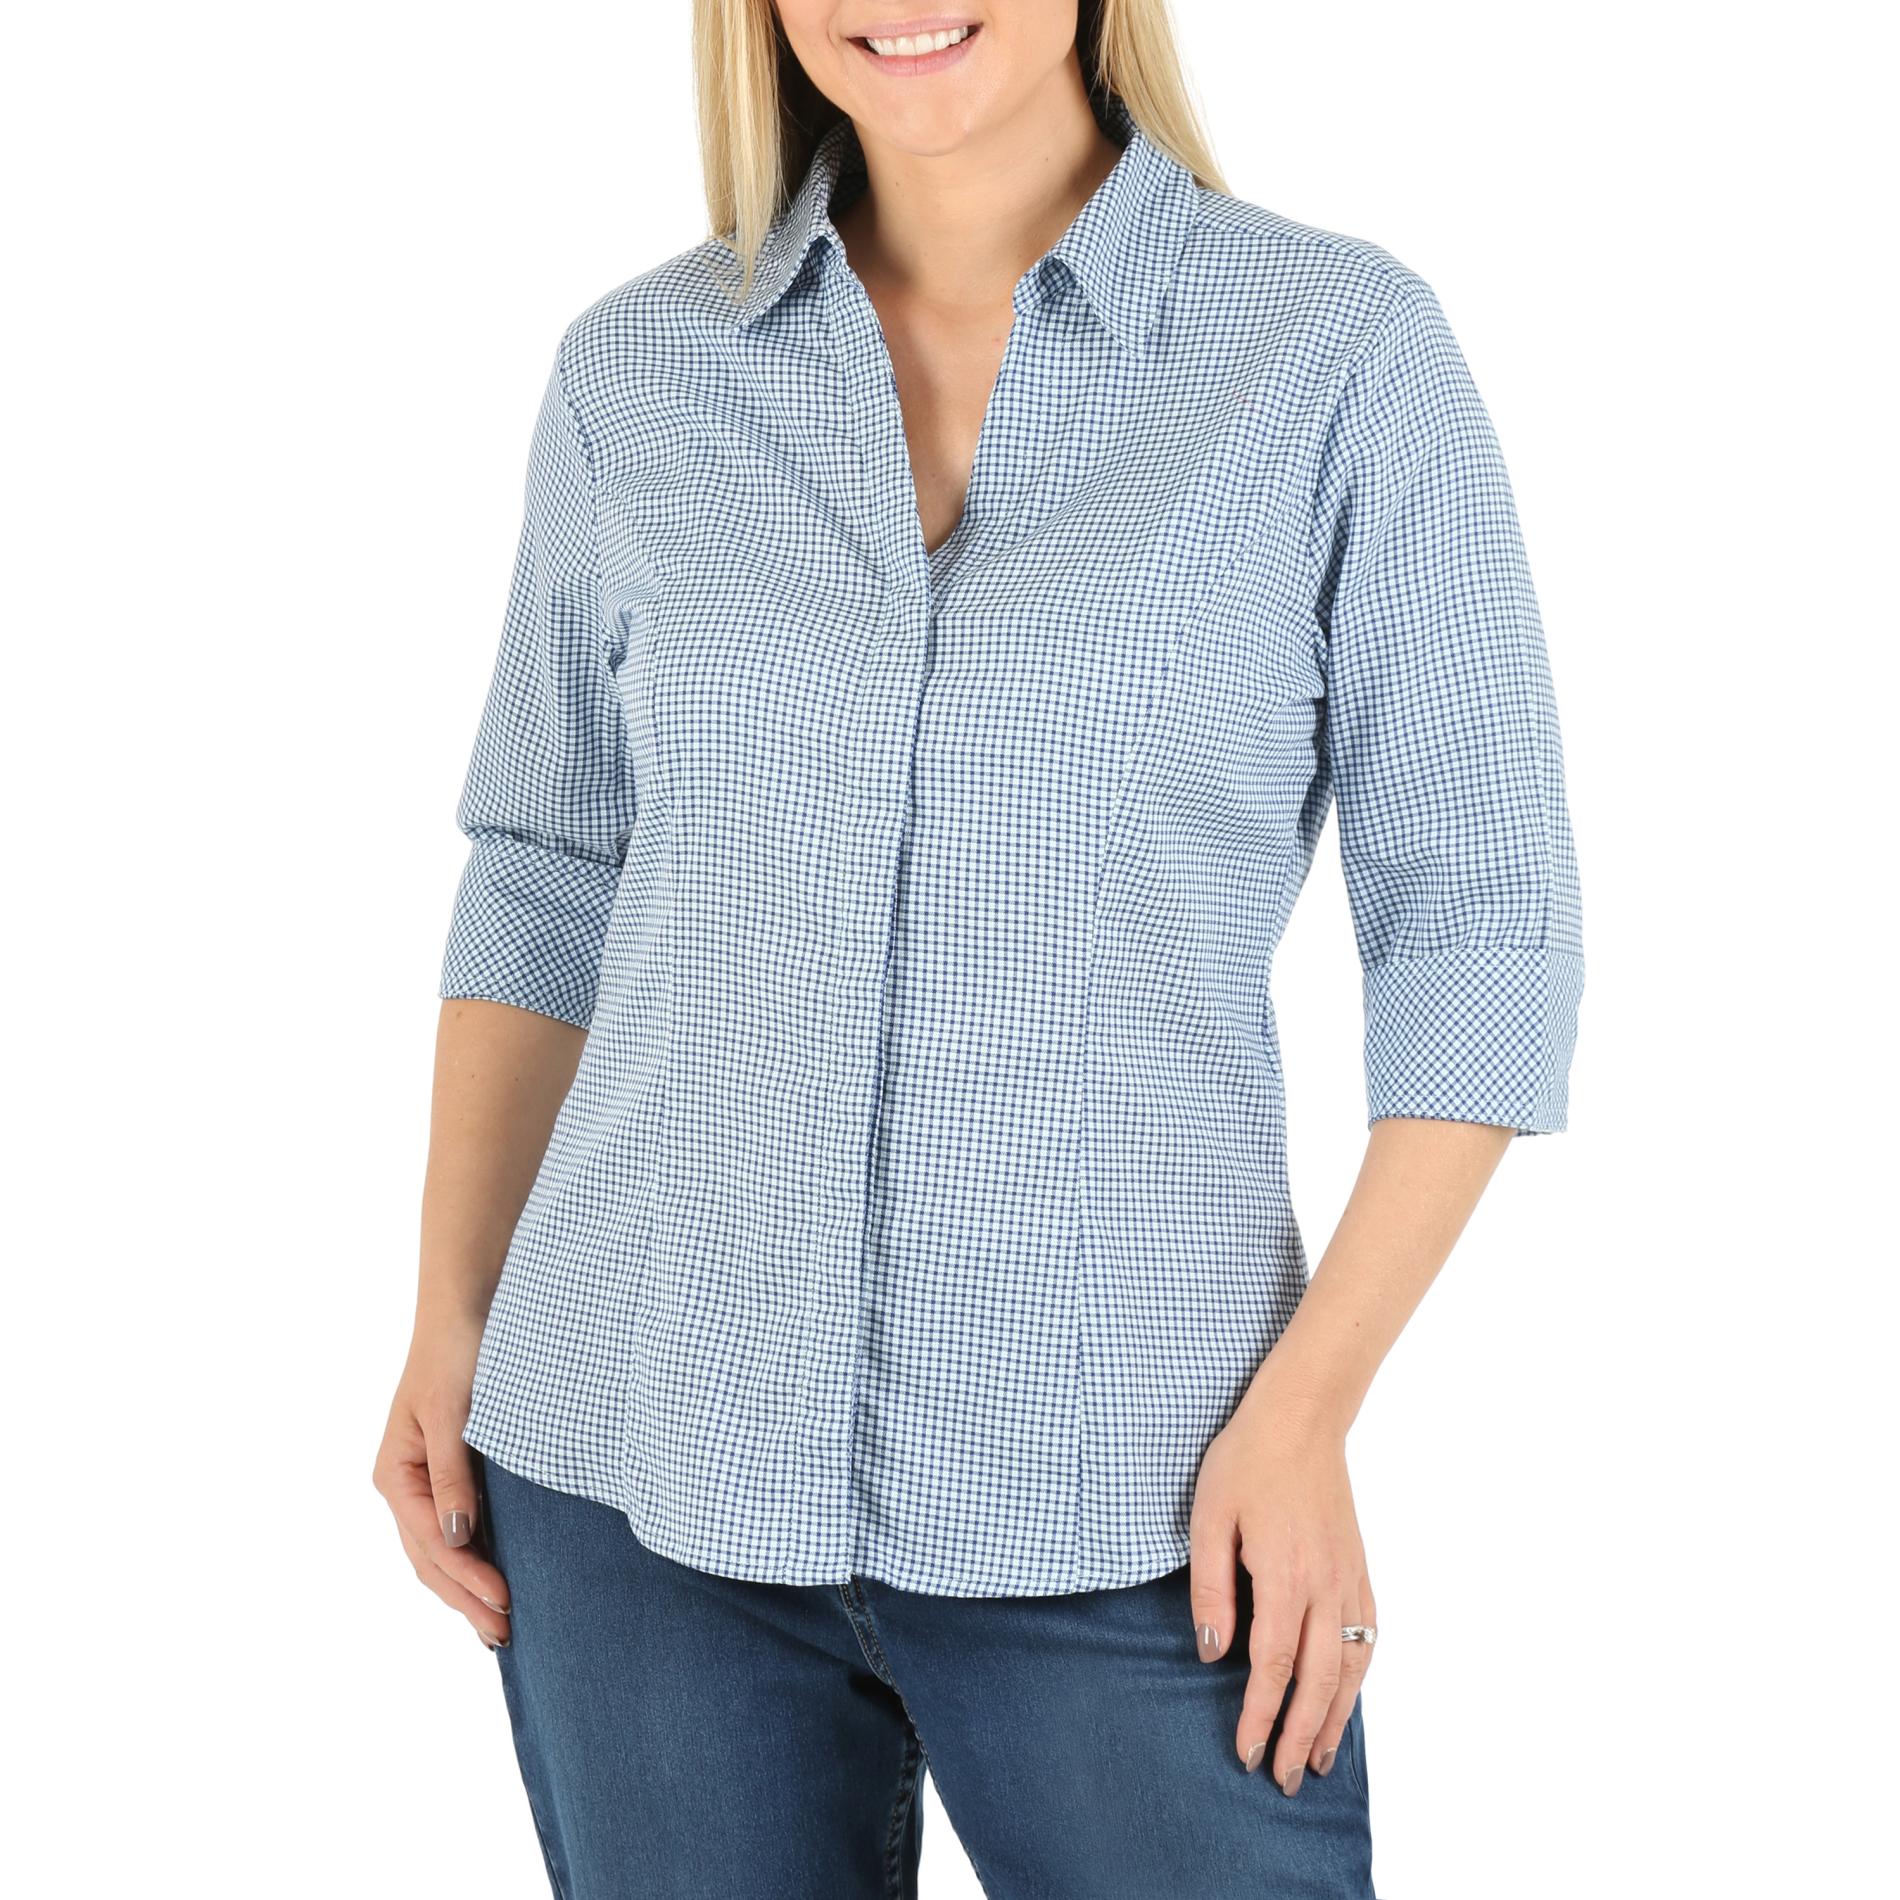 Riders by Lee Women's Button-Front Shirt - Gingham